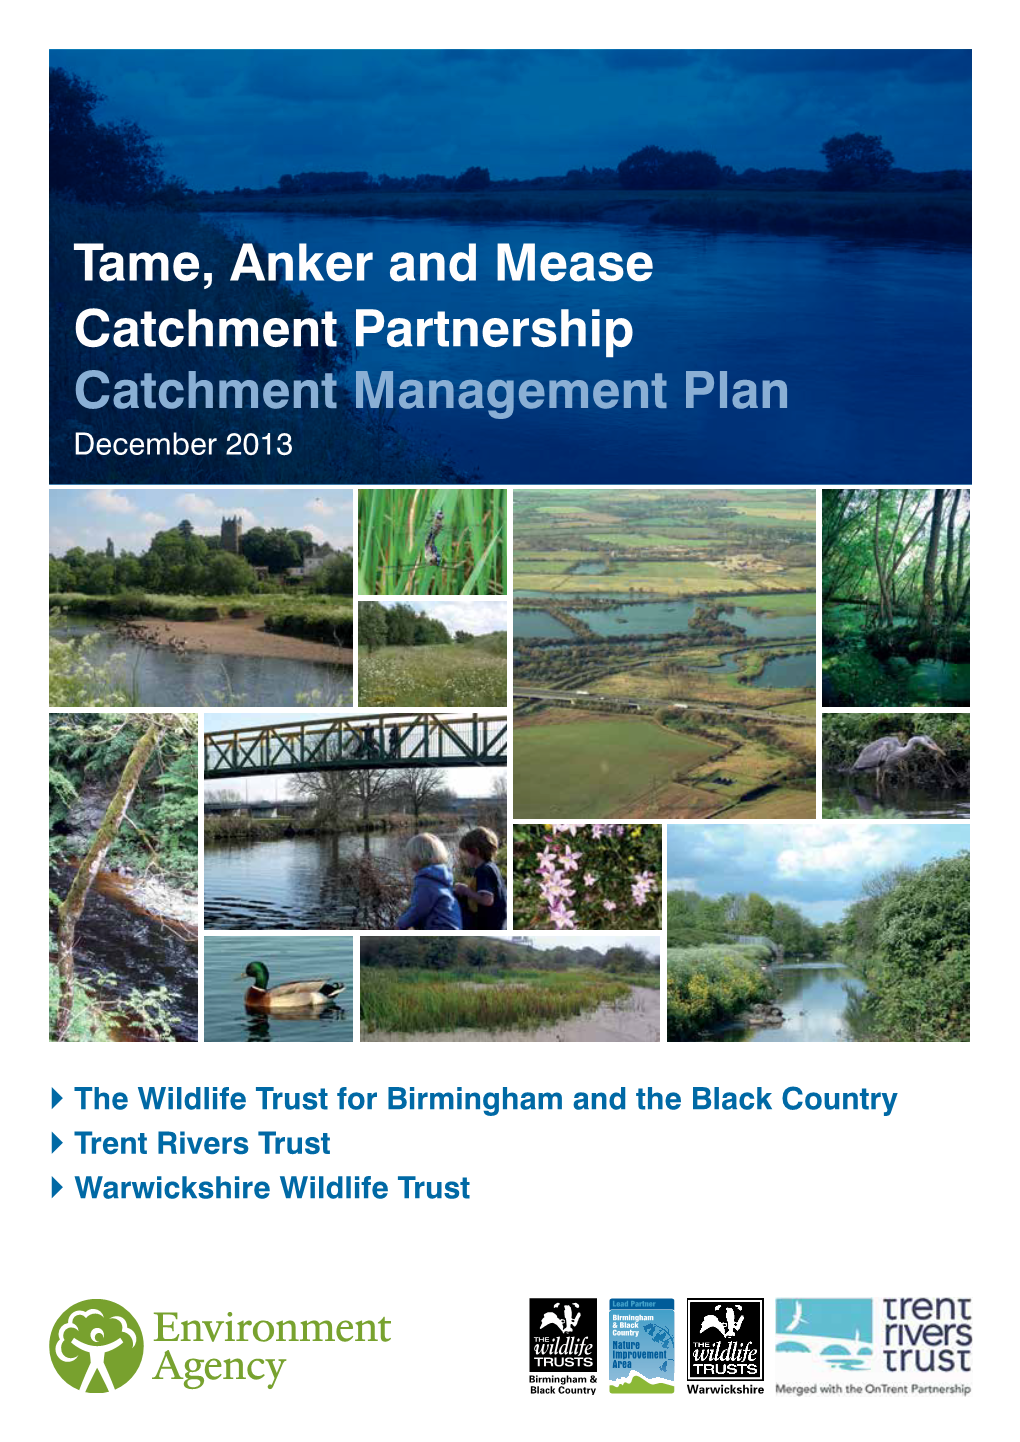 Tame, Anker and Mease Catchment Partnership Catchment Management Plan December 2013